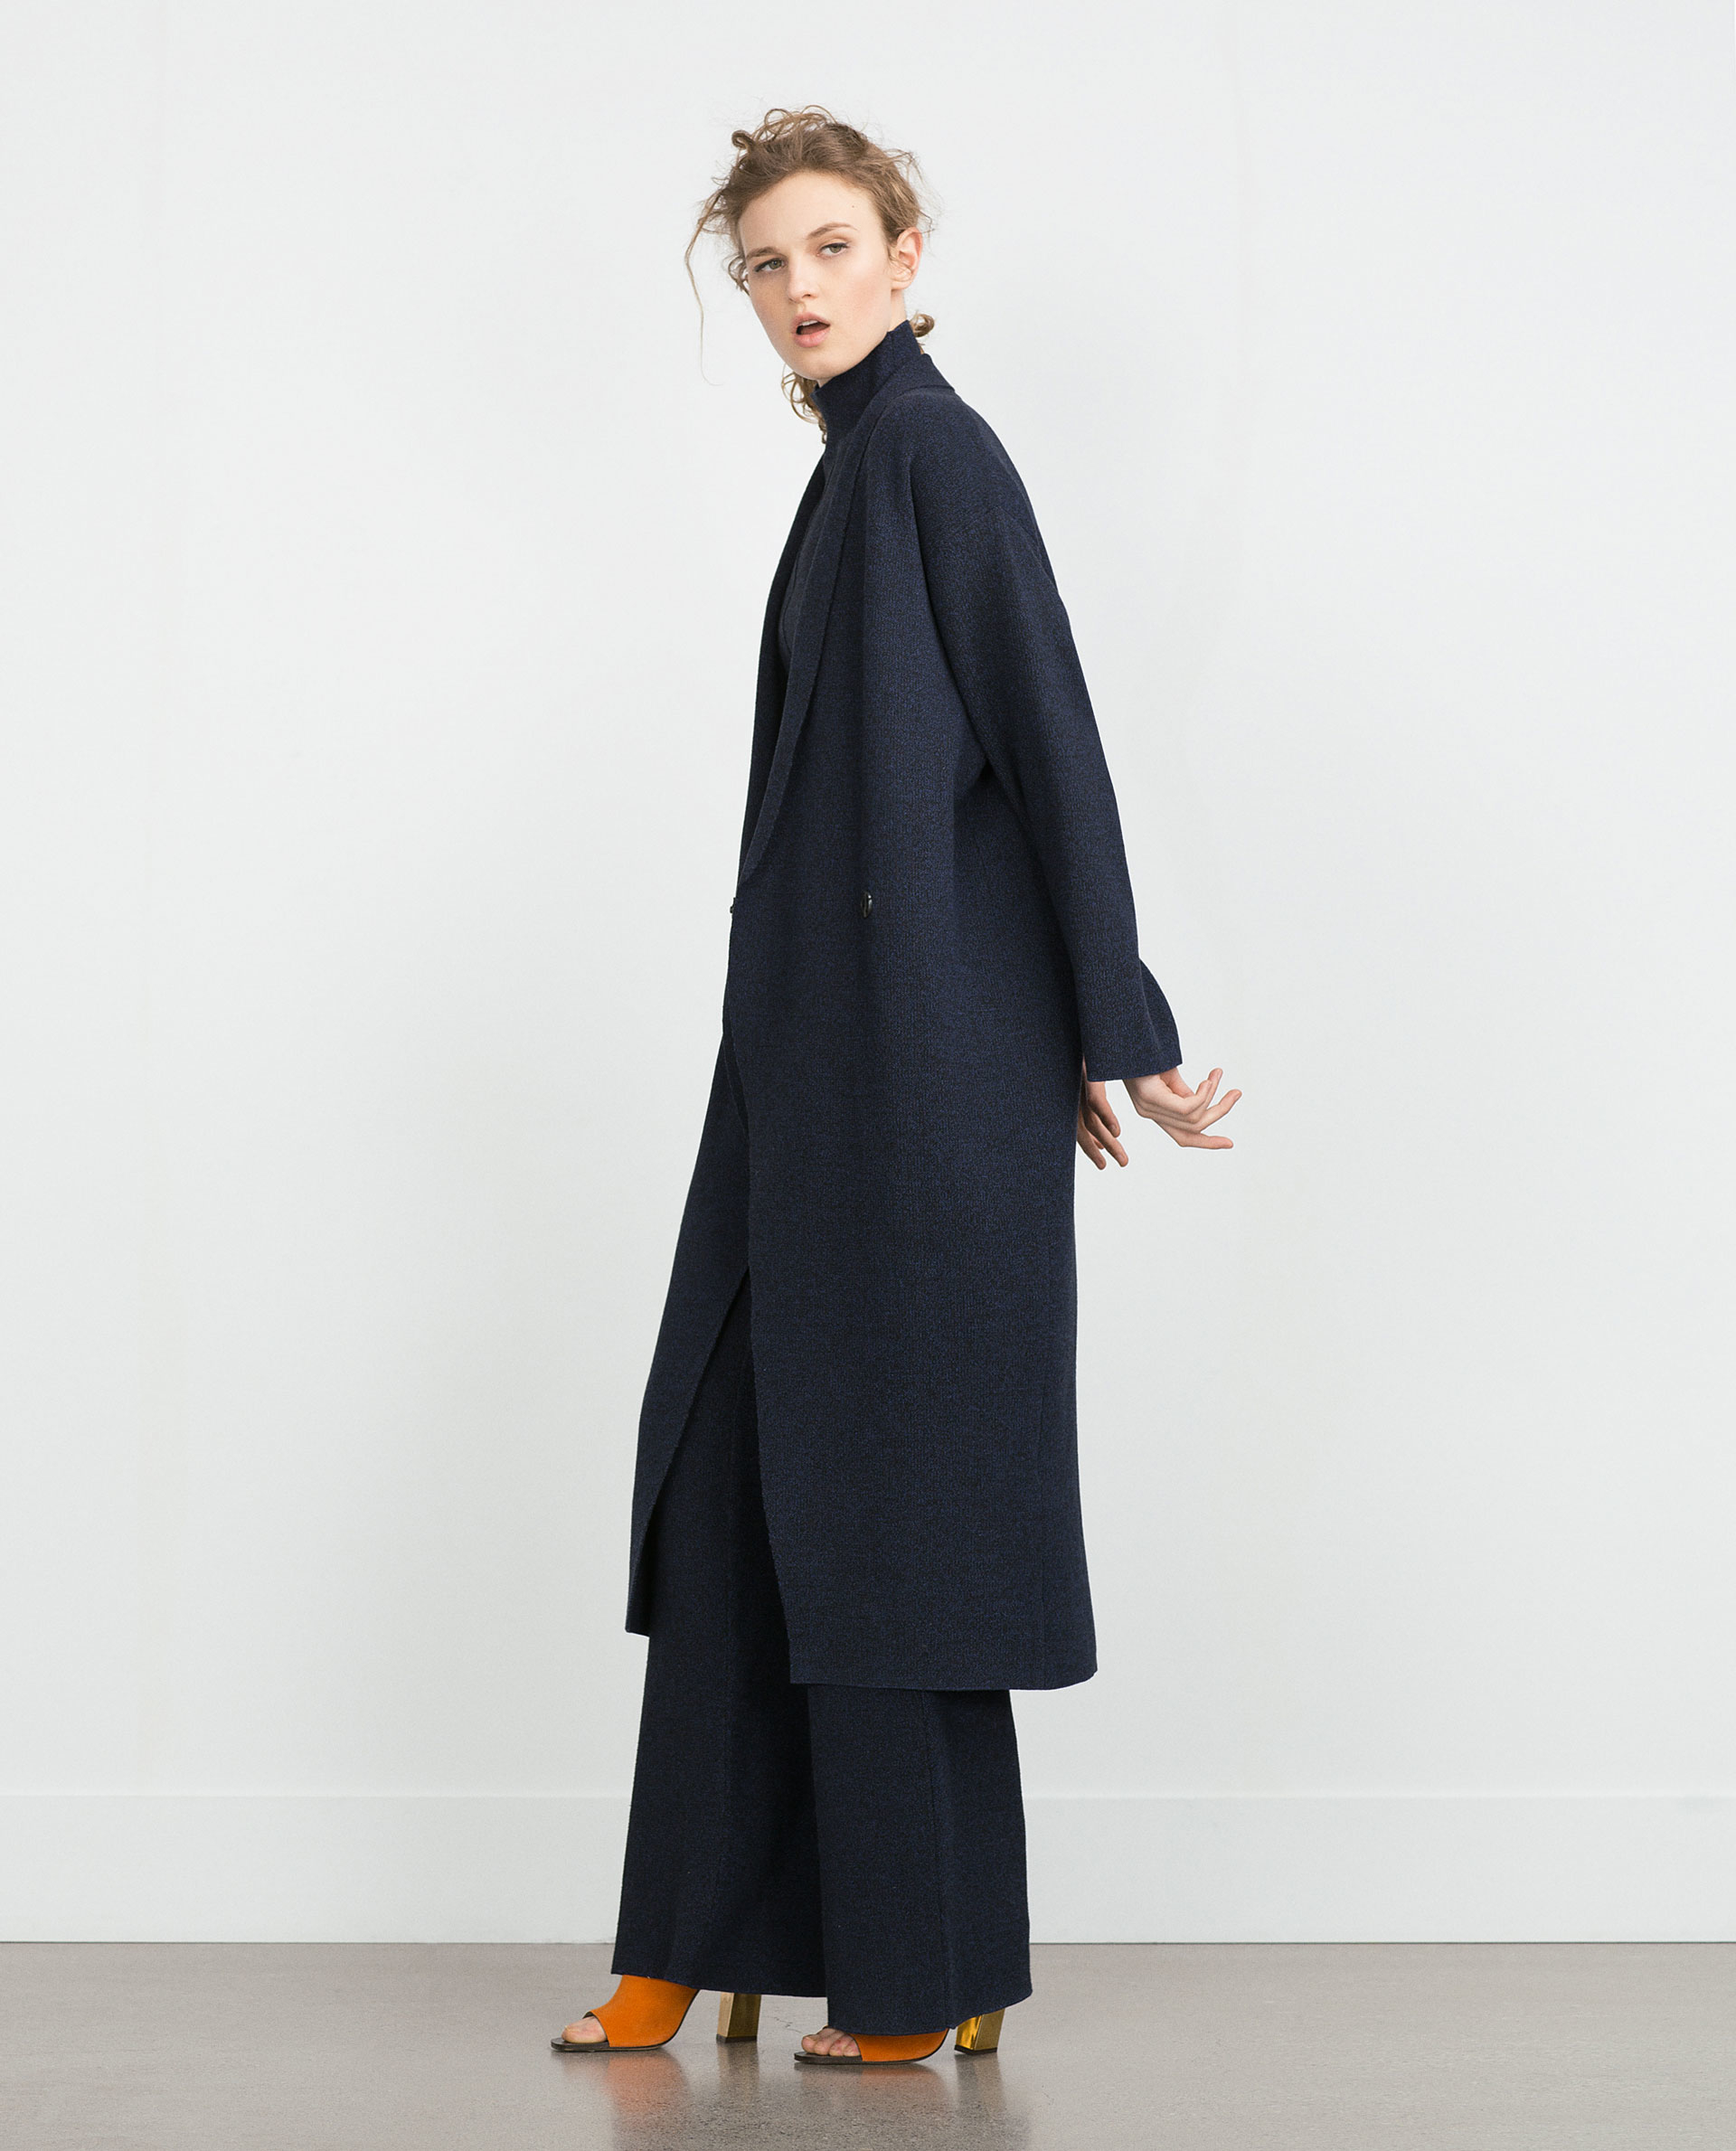 Collection Oversized Coat Pictures - Reikian